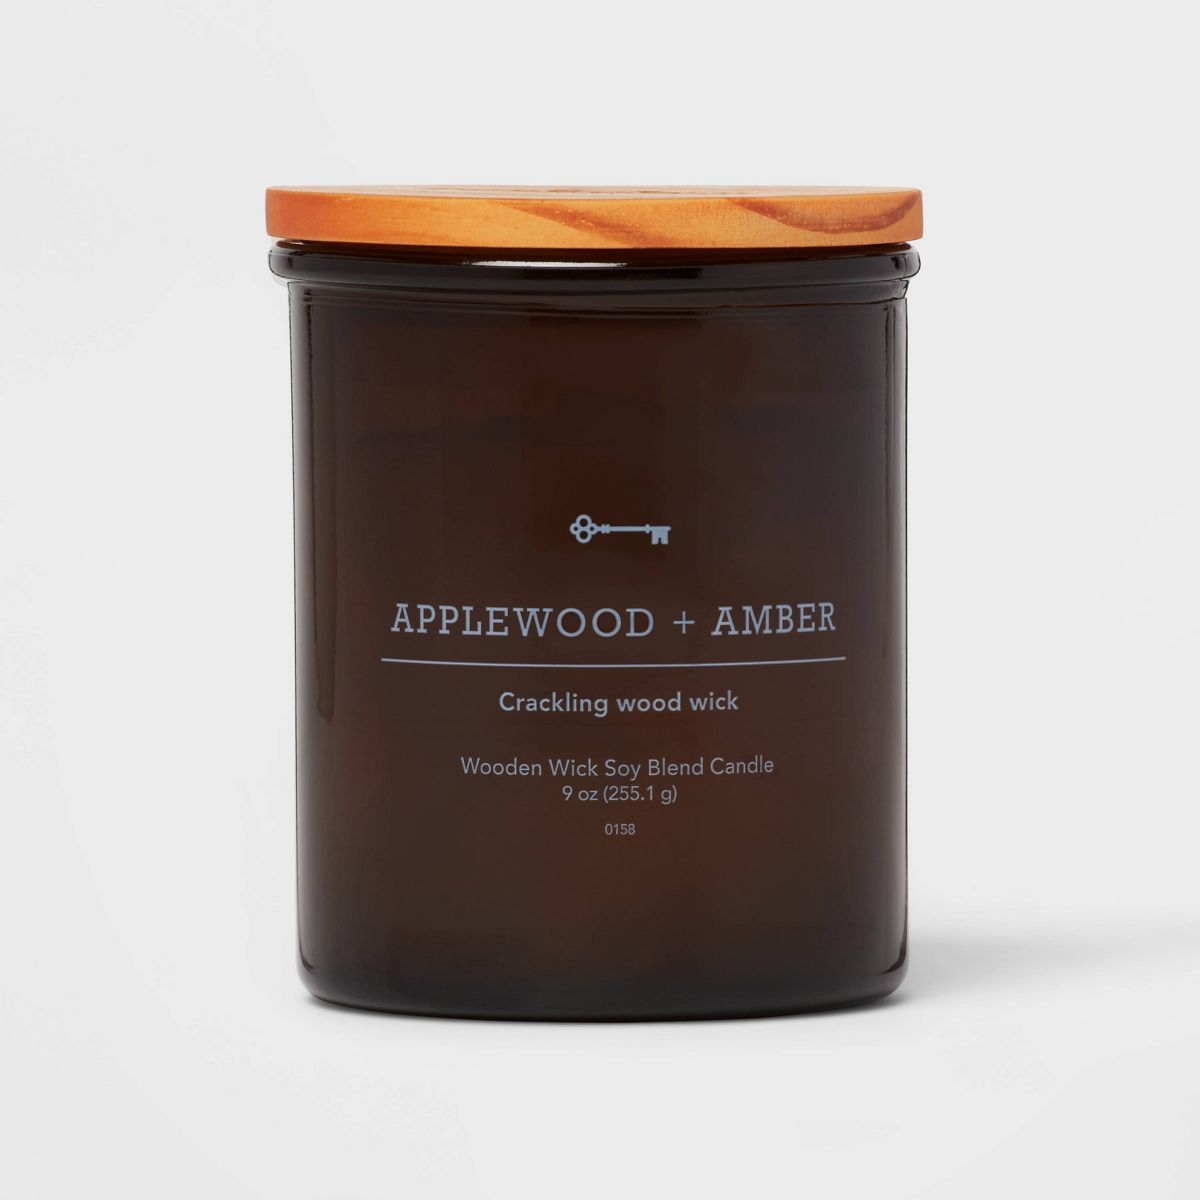 9oz Lidded Glass Jar Crackling Wooden Wick Candle Applewood and Amber - Threshold™ | Target